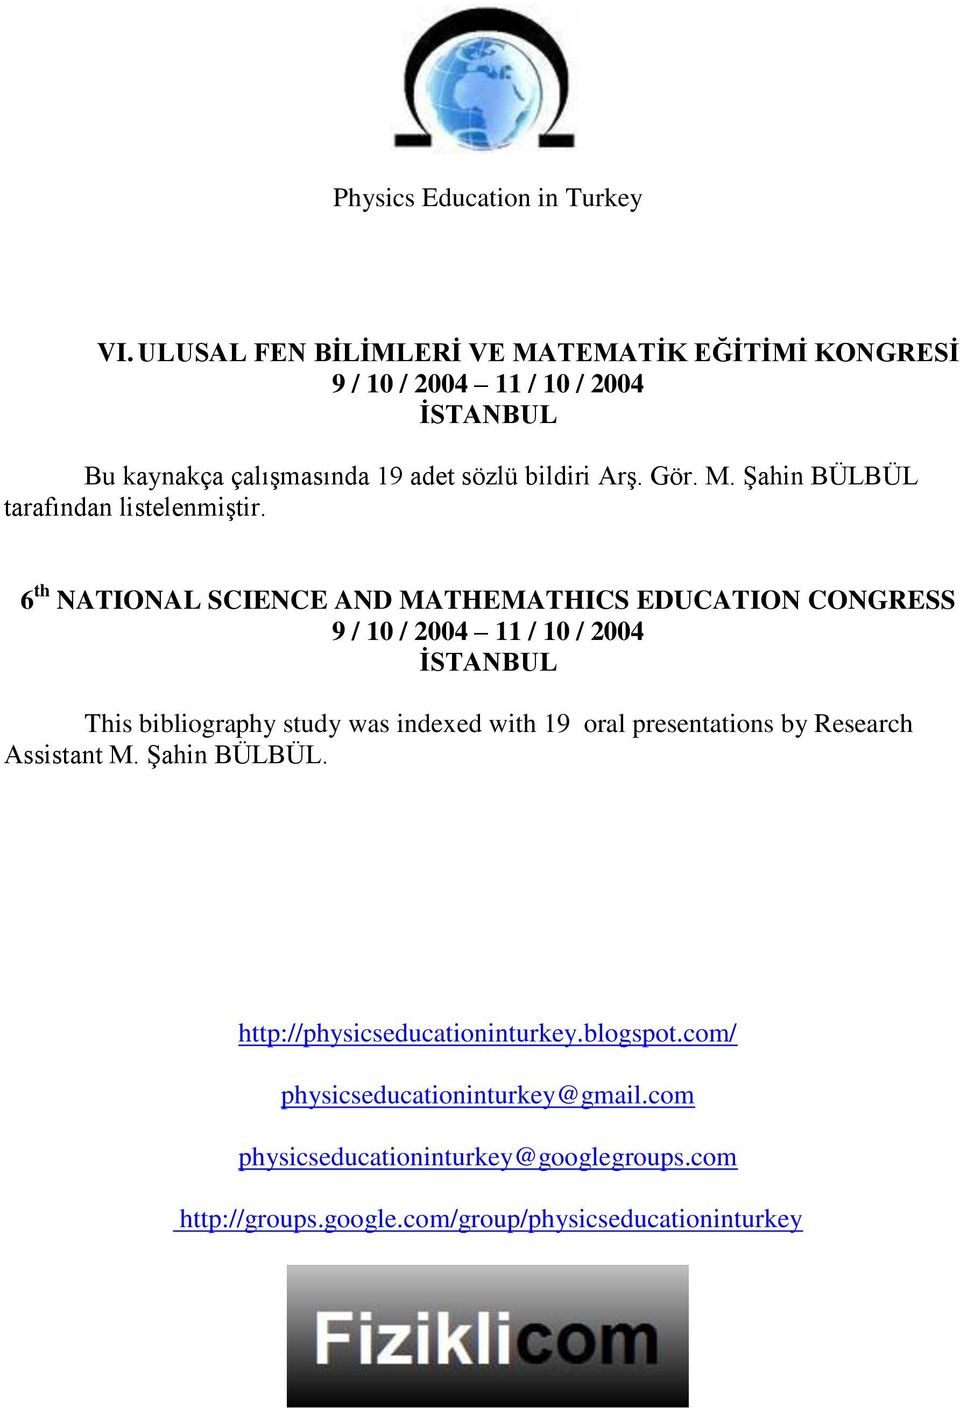 6 th NATIONAL SCIENCE AND MATHEMATHICS EDUCATION CONGRESS 9 / 10 / 2004 11 / 10 / 2004 İSTANBUL This bibliography study was indexed with 19 oral